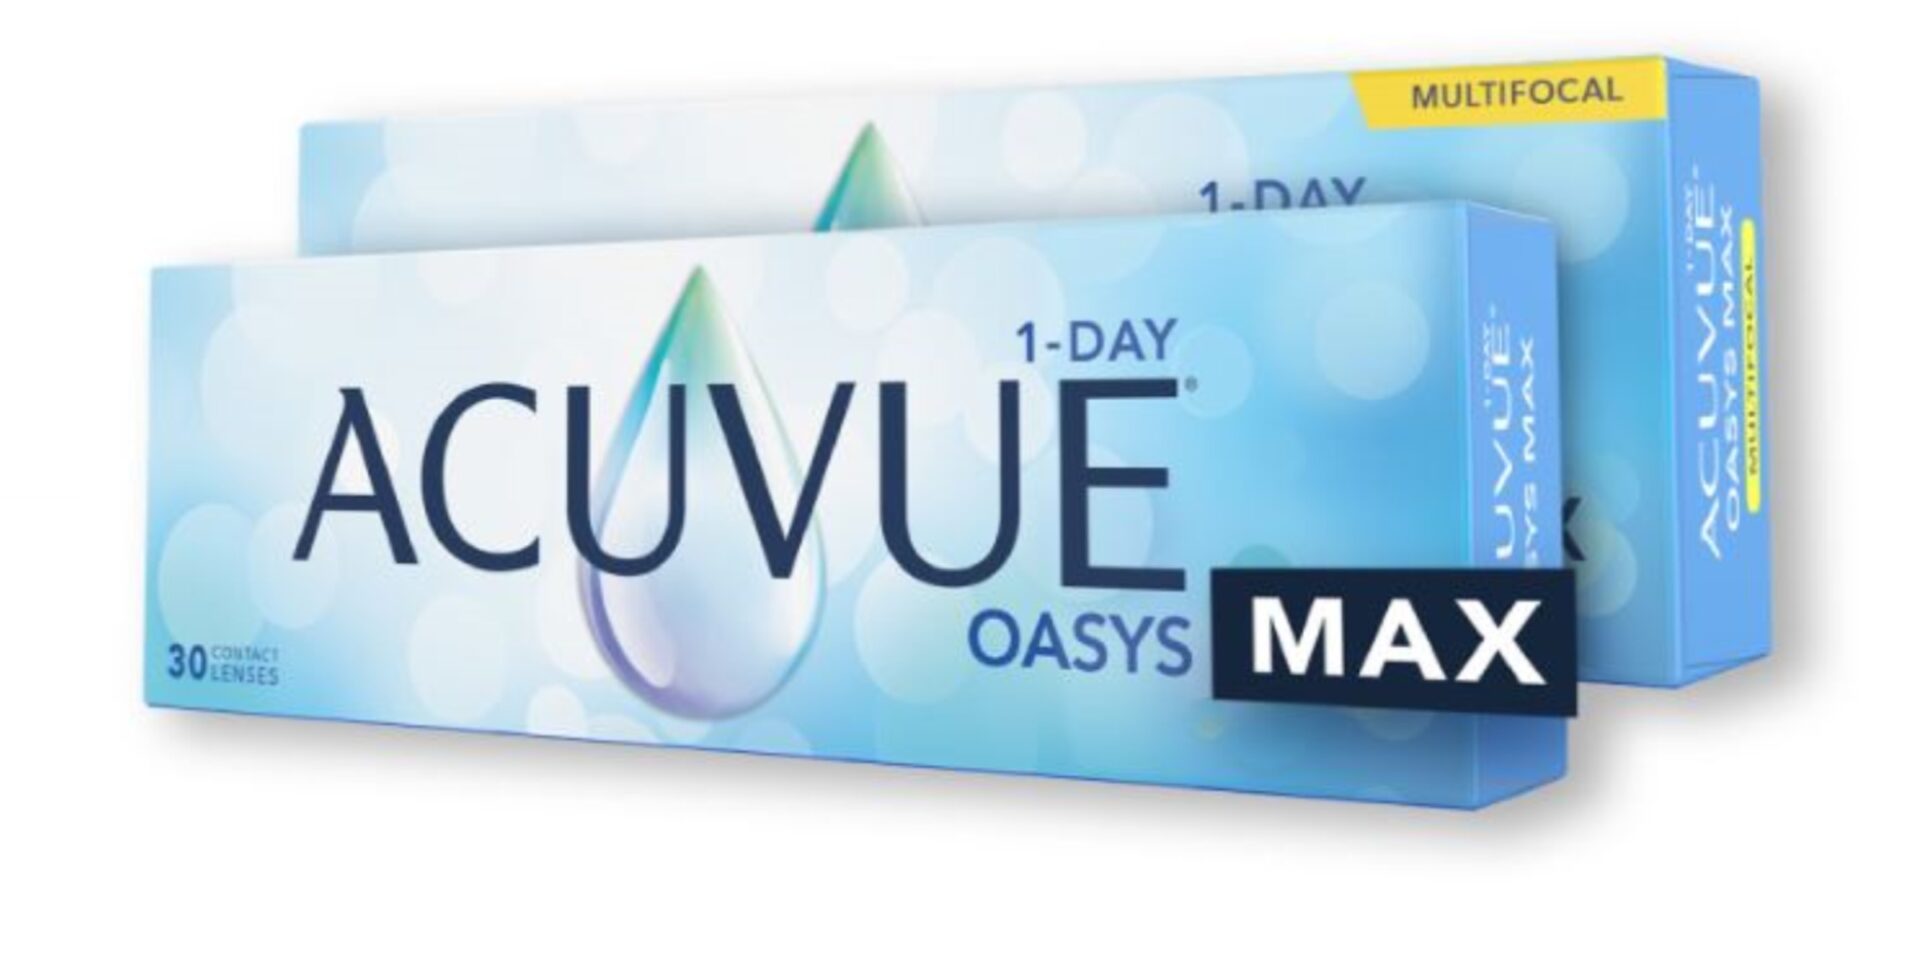 Acuvue Oasys Max 1 Day Multifocal 90 Pack MyLens USA